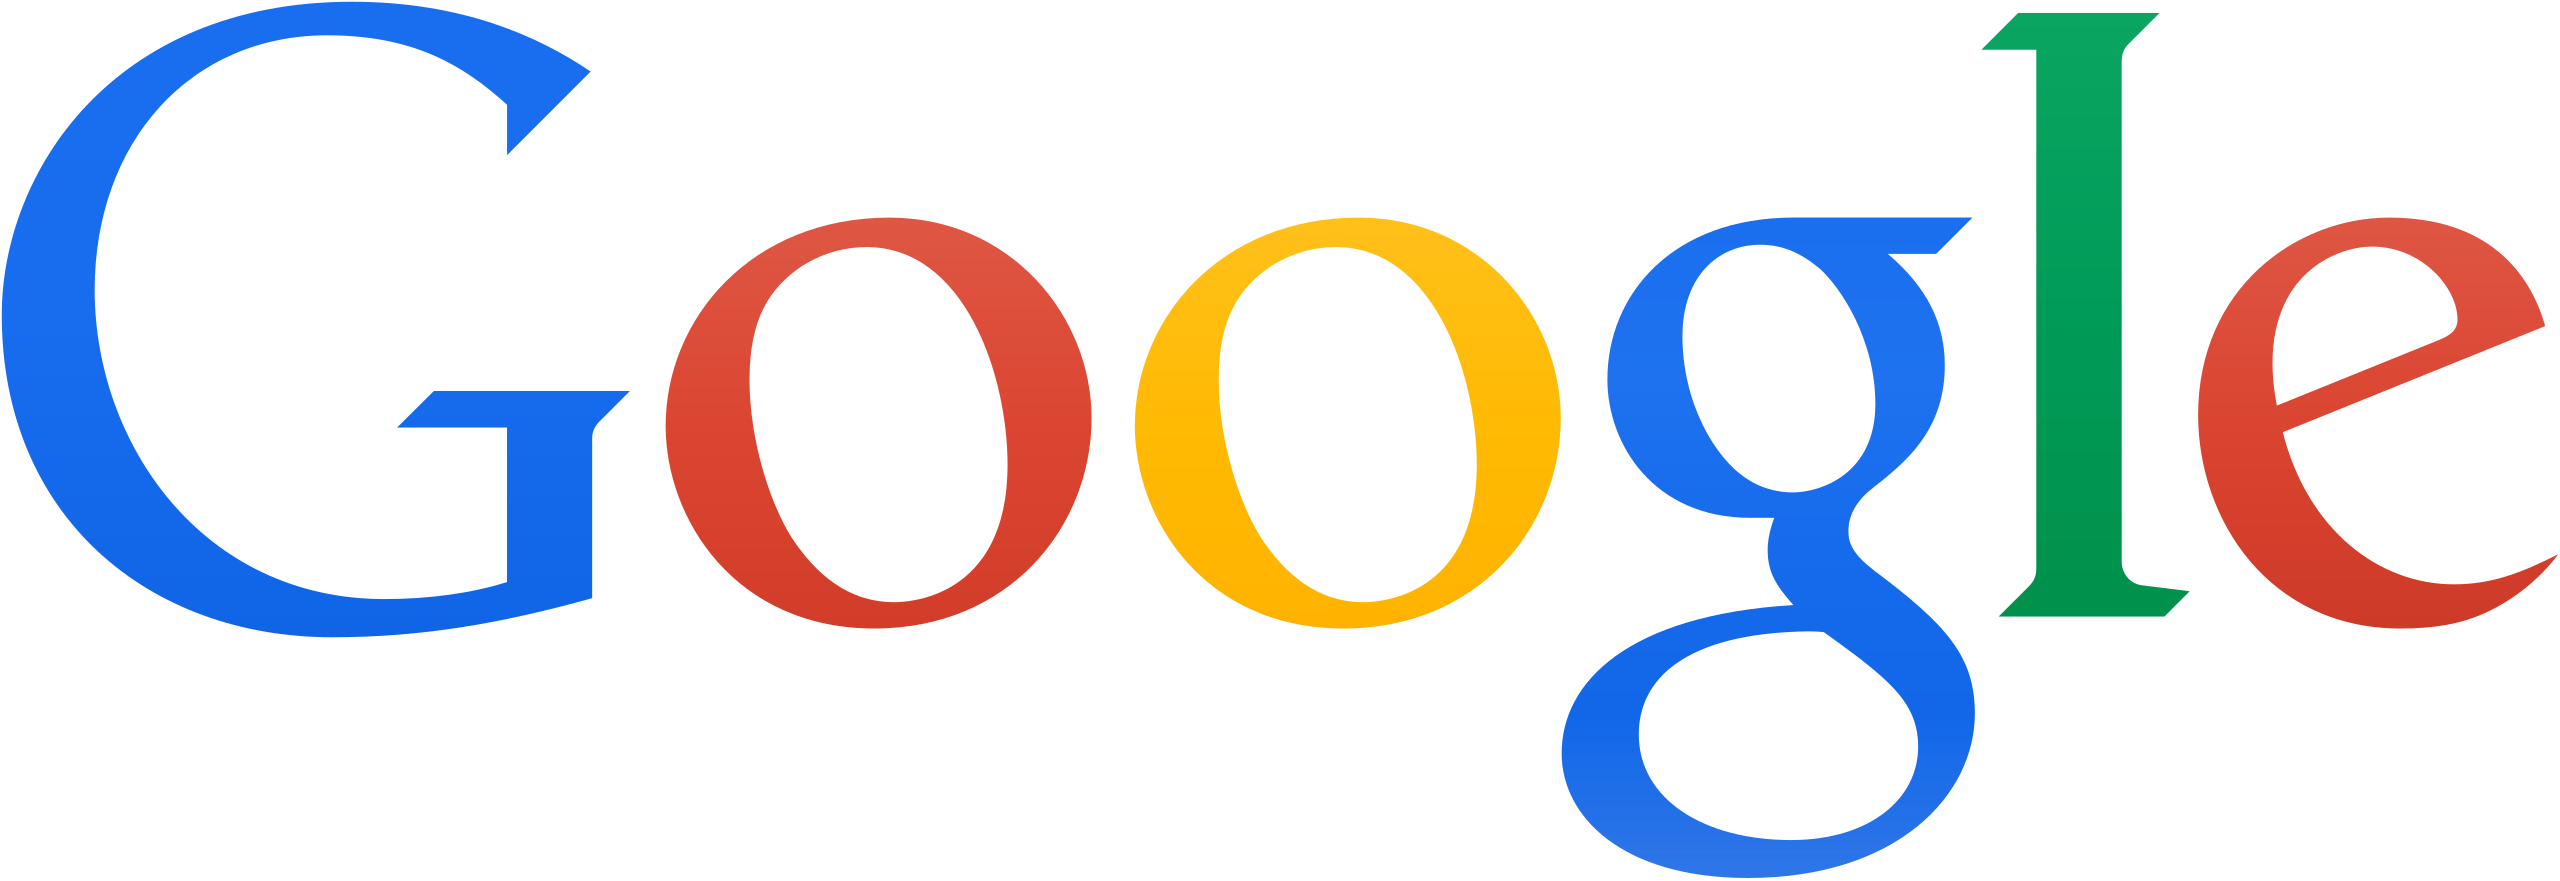 Google logo with multicolored lettering on white background